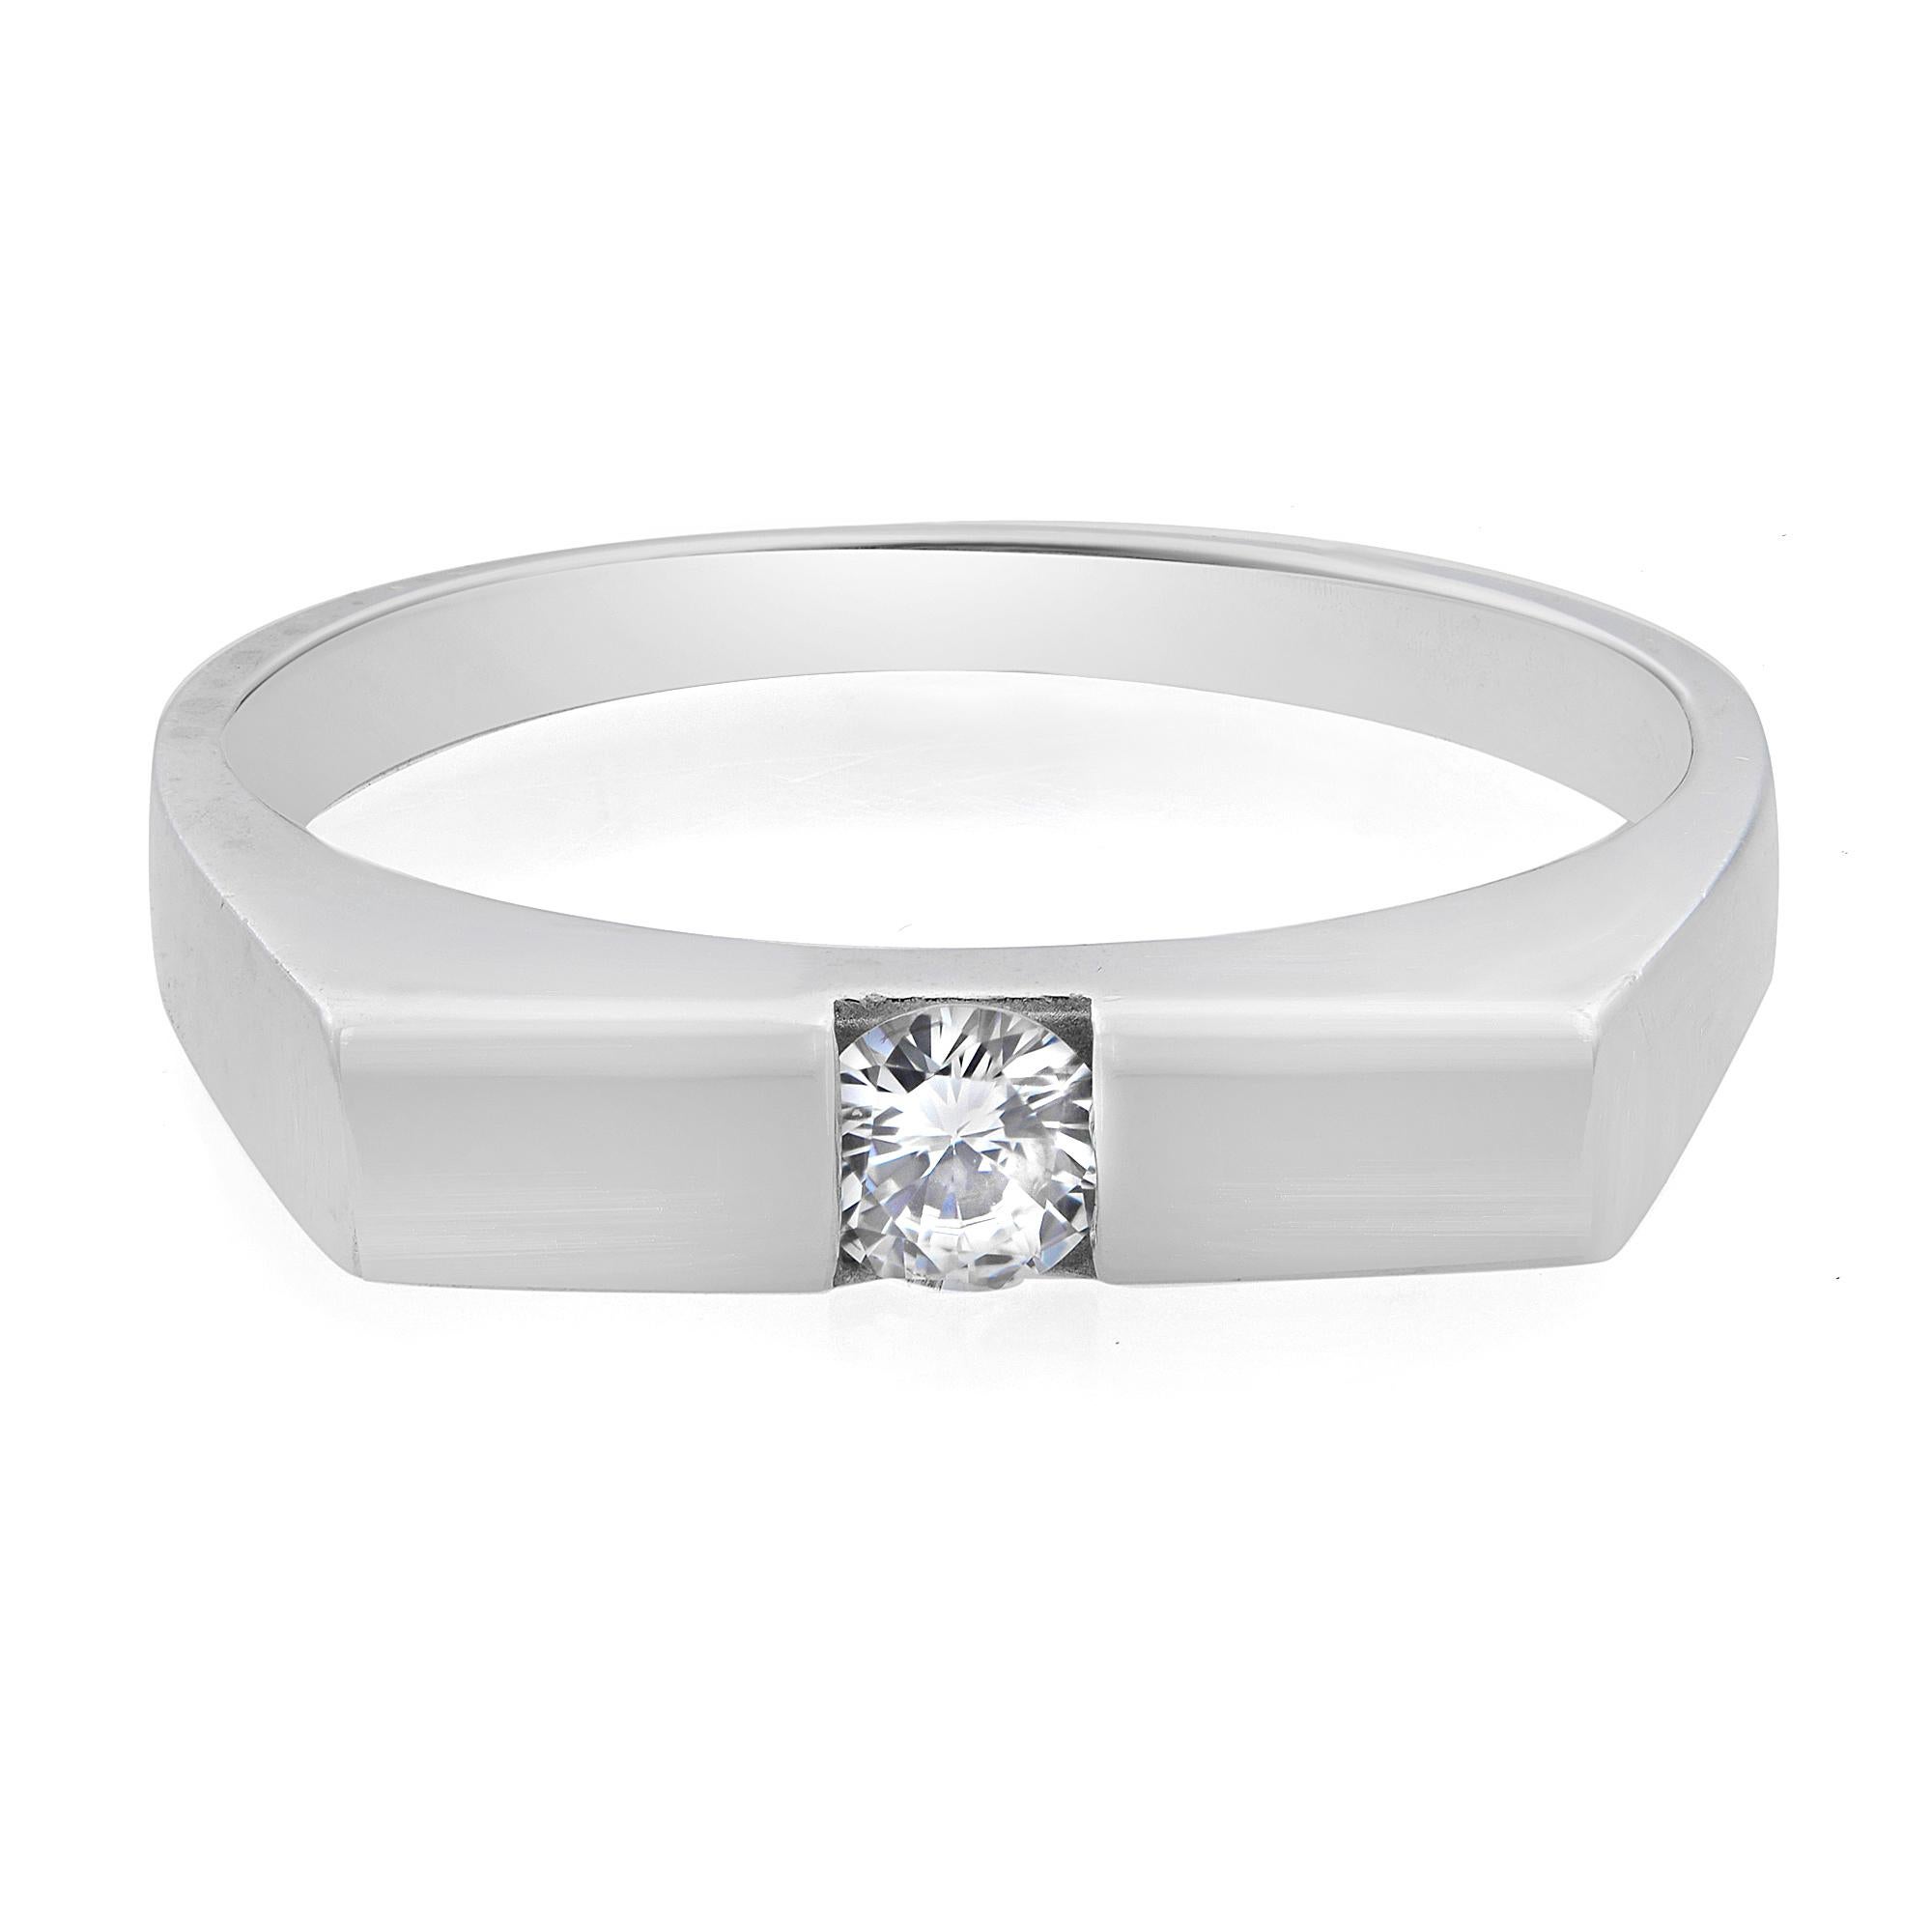 This beautiful and unique diamond wedding band ring is set with one round cut 0.10cttw diamond. Crafted in 14K white gold. Ring size 6.25. Weight: 2.60 grams. Comes with a presentable gift box. 